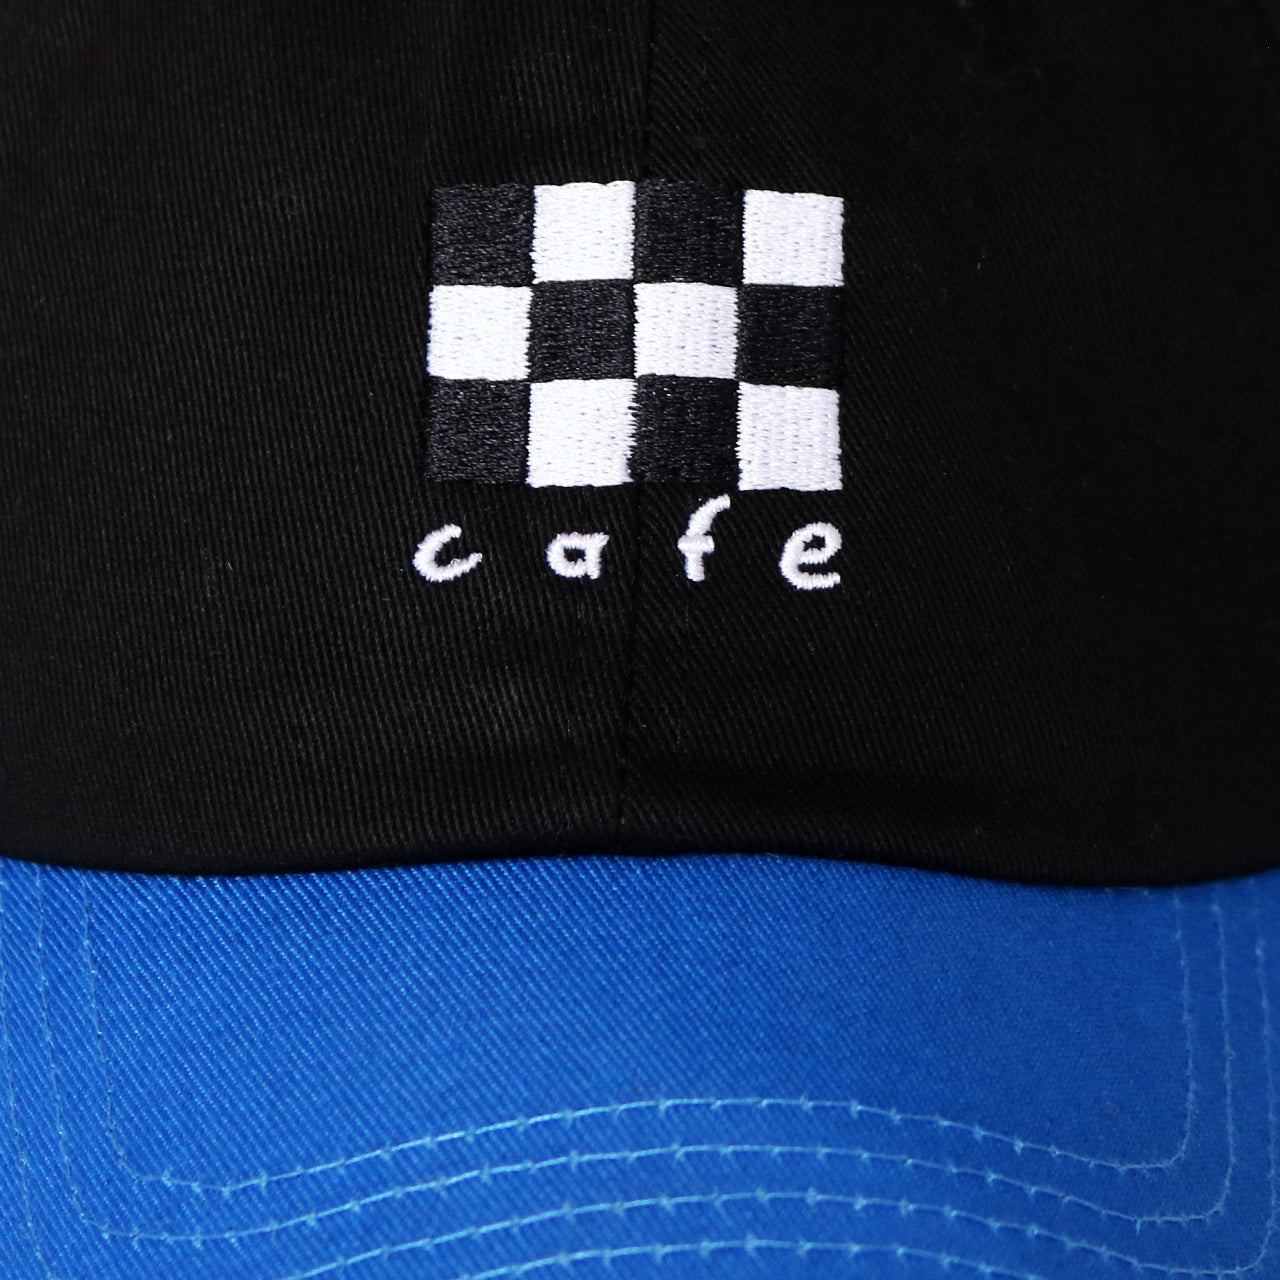 Checkerboard Embroidered 6 Panel Cap - Black/Blue